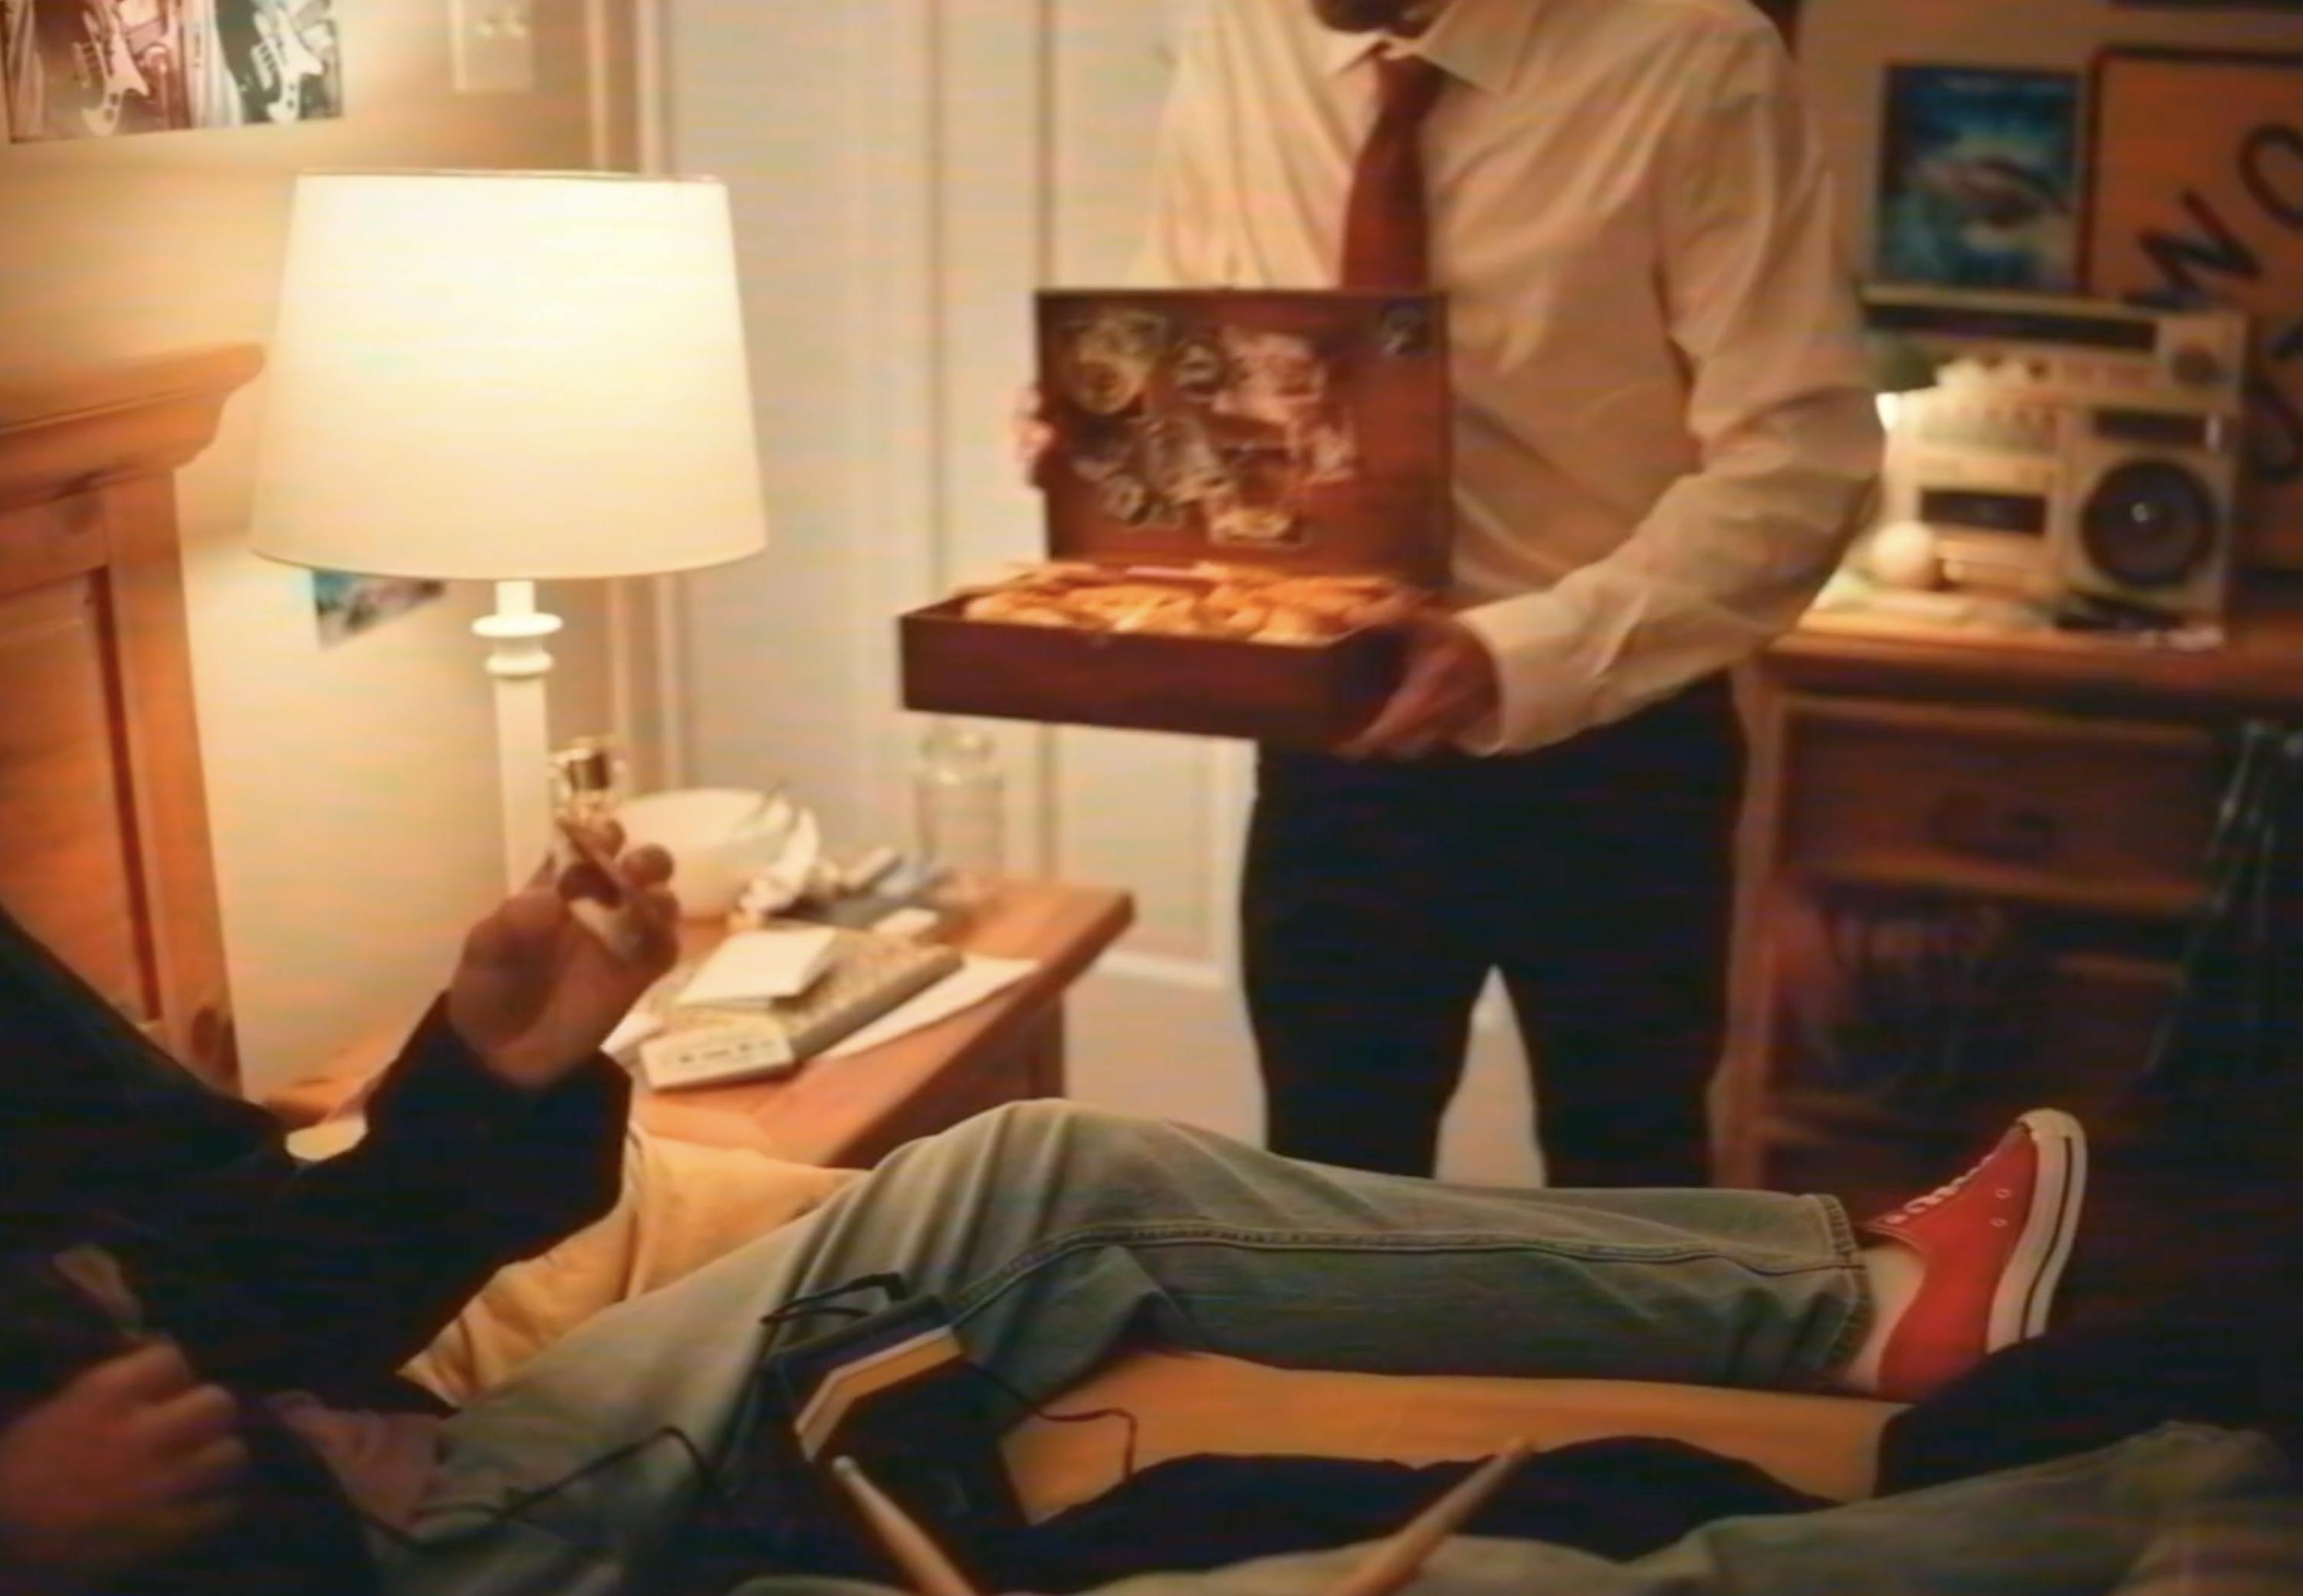 A man in a suit brings a box of food to someone laying in bed